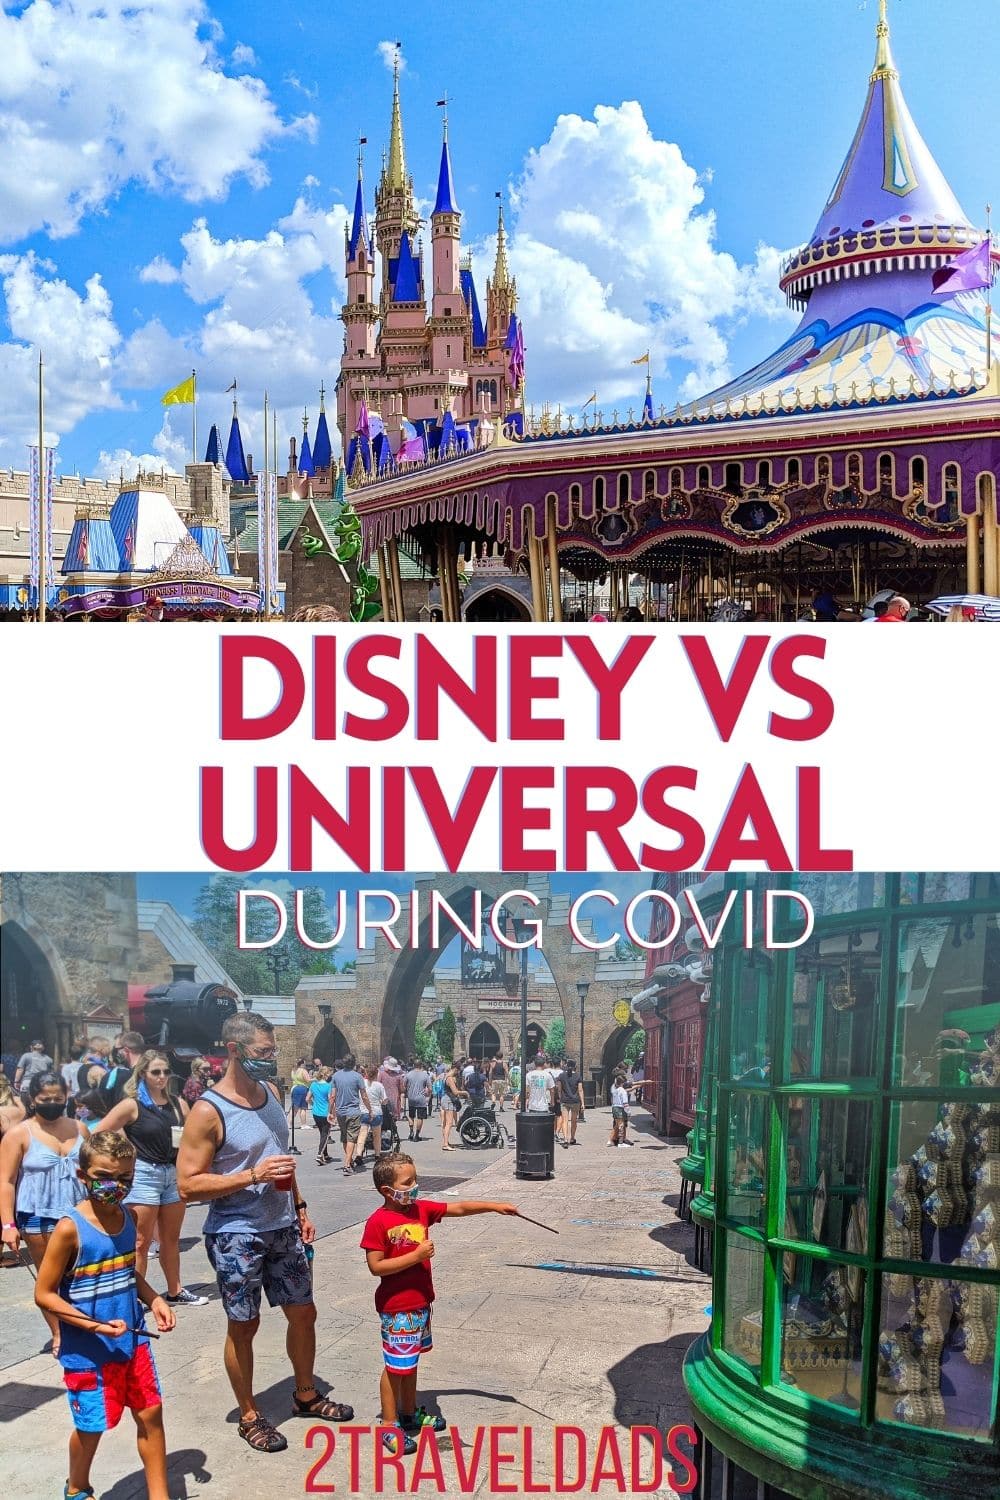 Since Orlando theme parks are open, is Disney World or Universal handling COVID-19 pandemic precautions better? Side by side comparison of health and safety measures between Universal Orlando and Disney World.